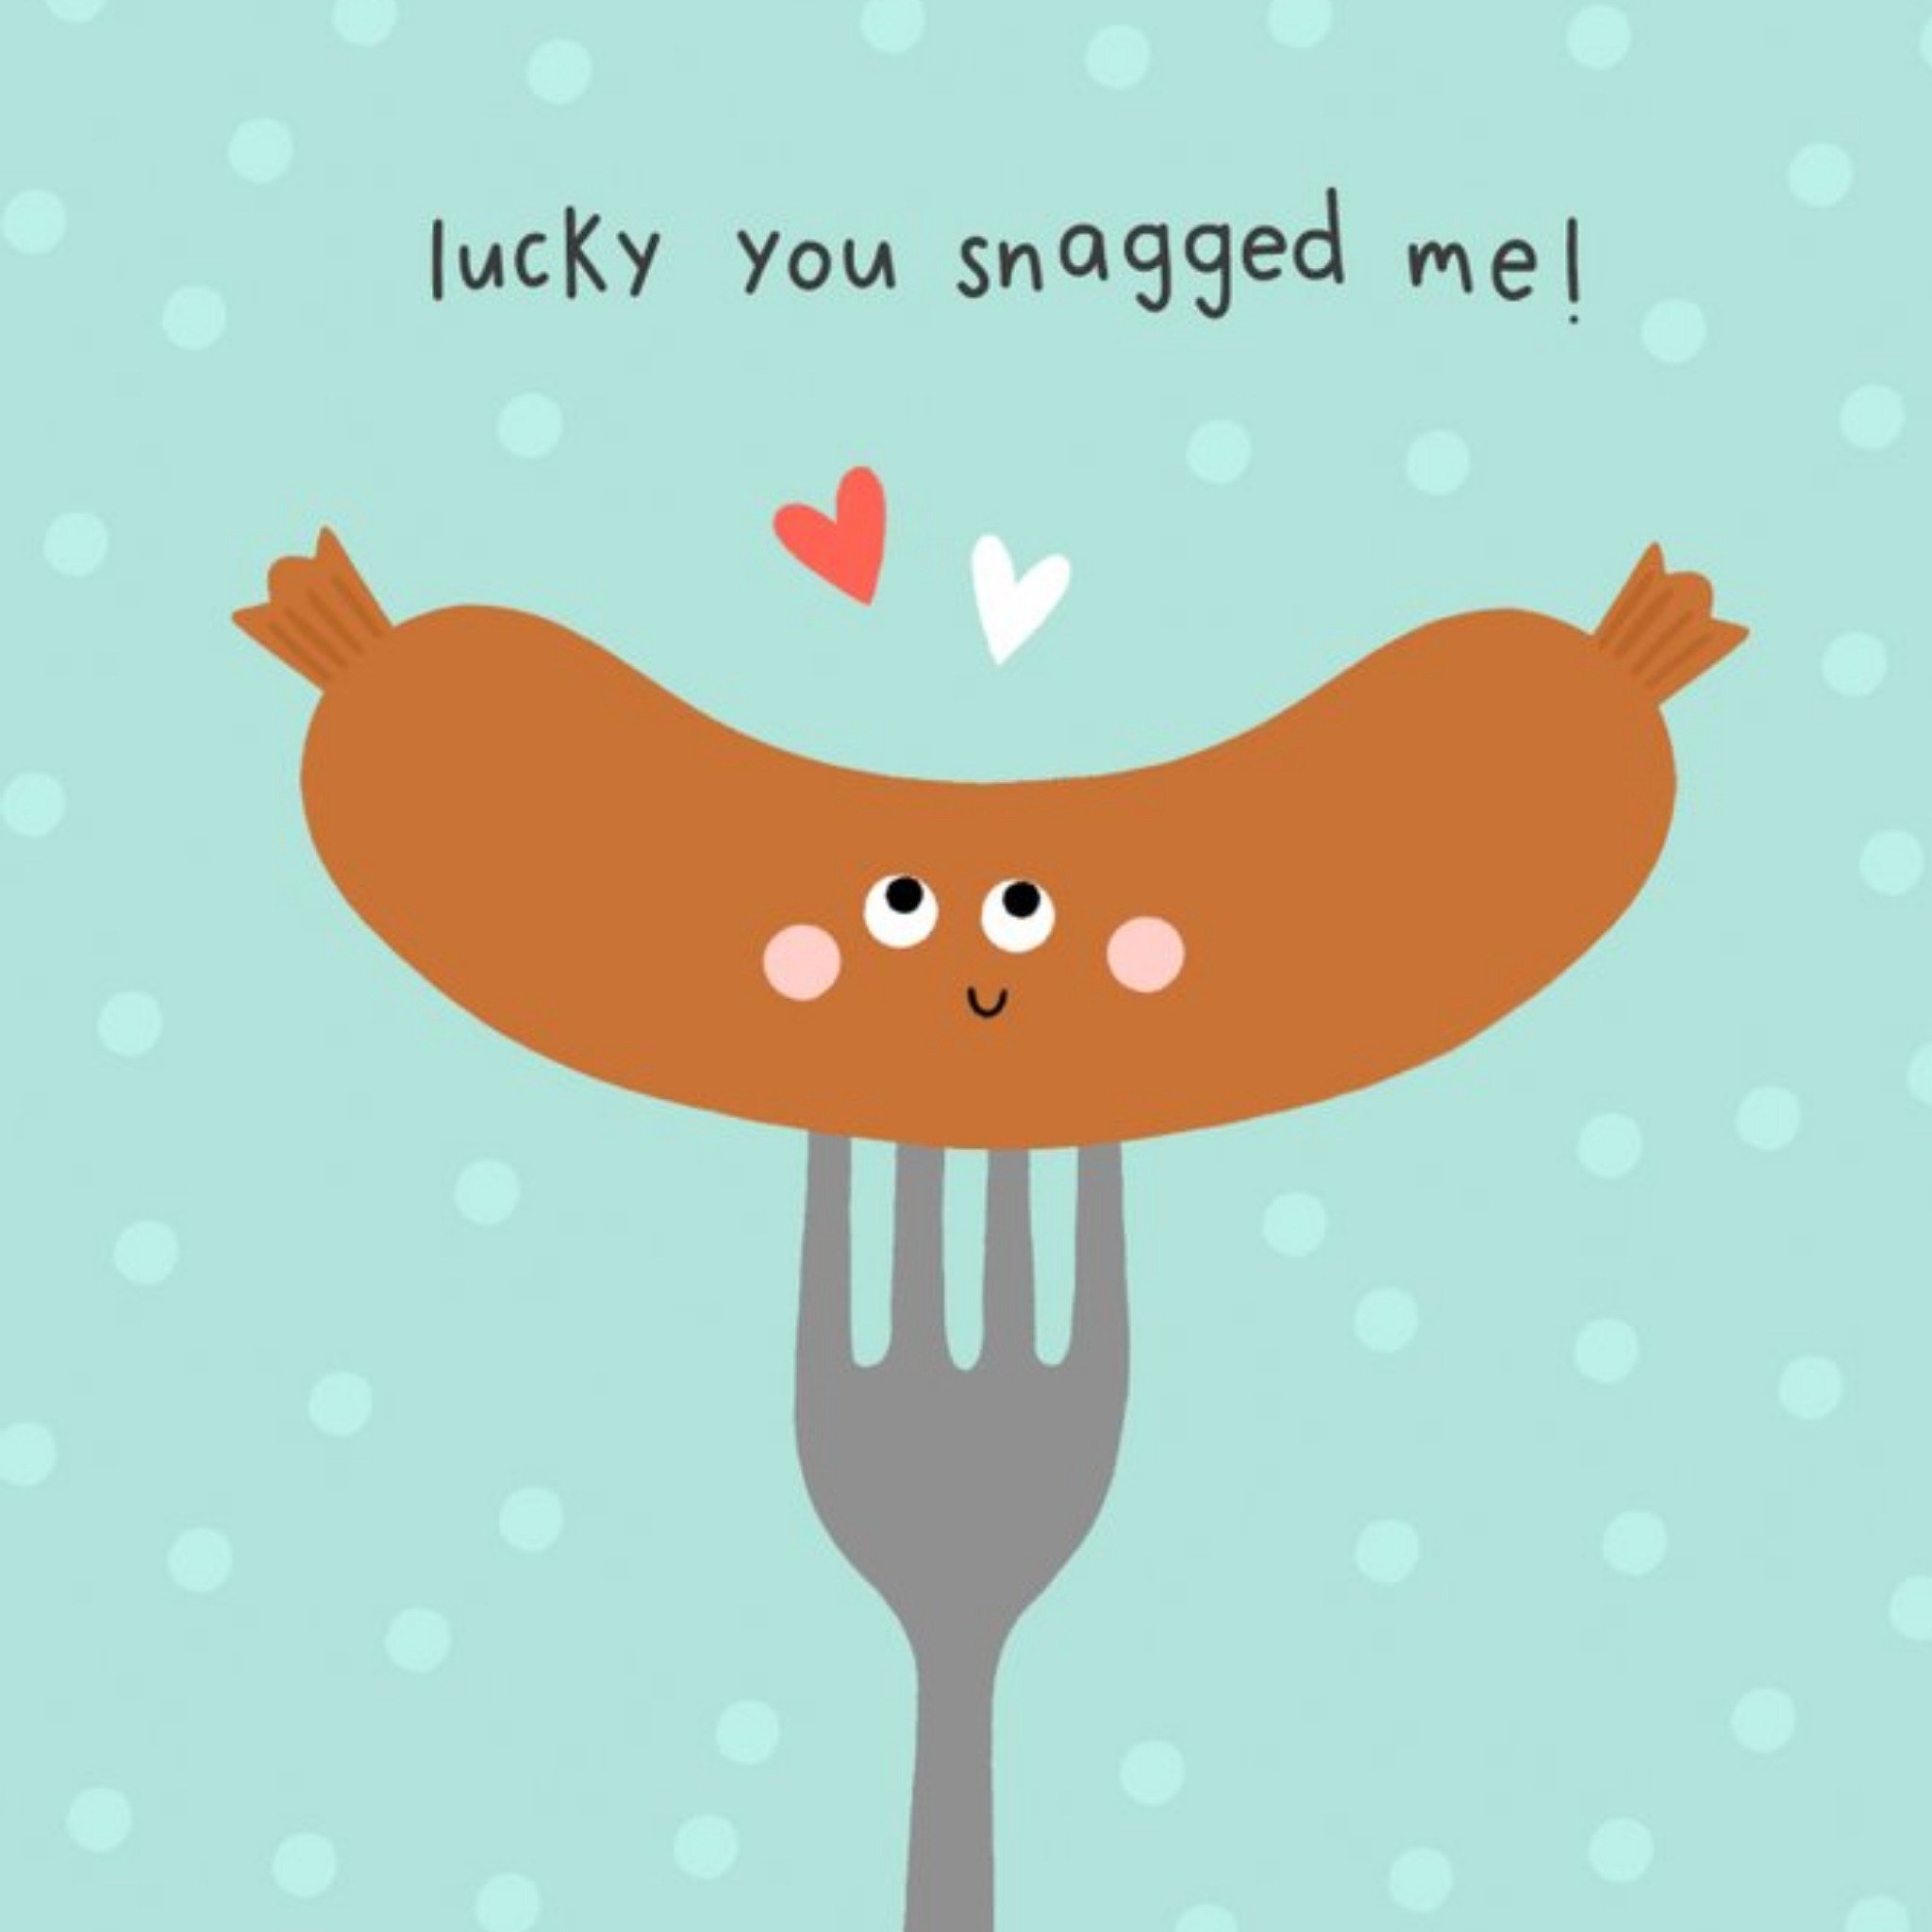 Moonpig Illustration Of A Smiley Faced Sausage On A Fork Valentine's Day Card, Large